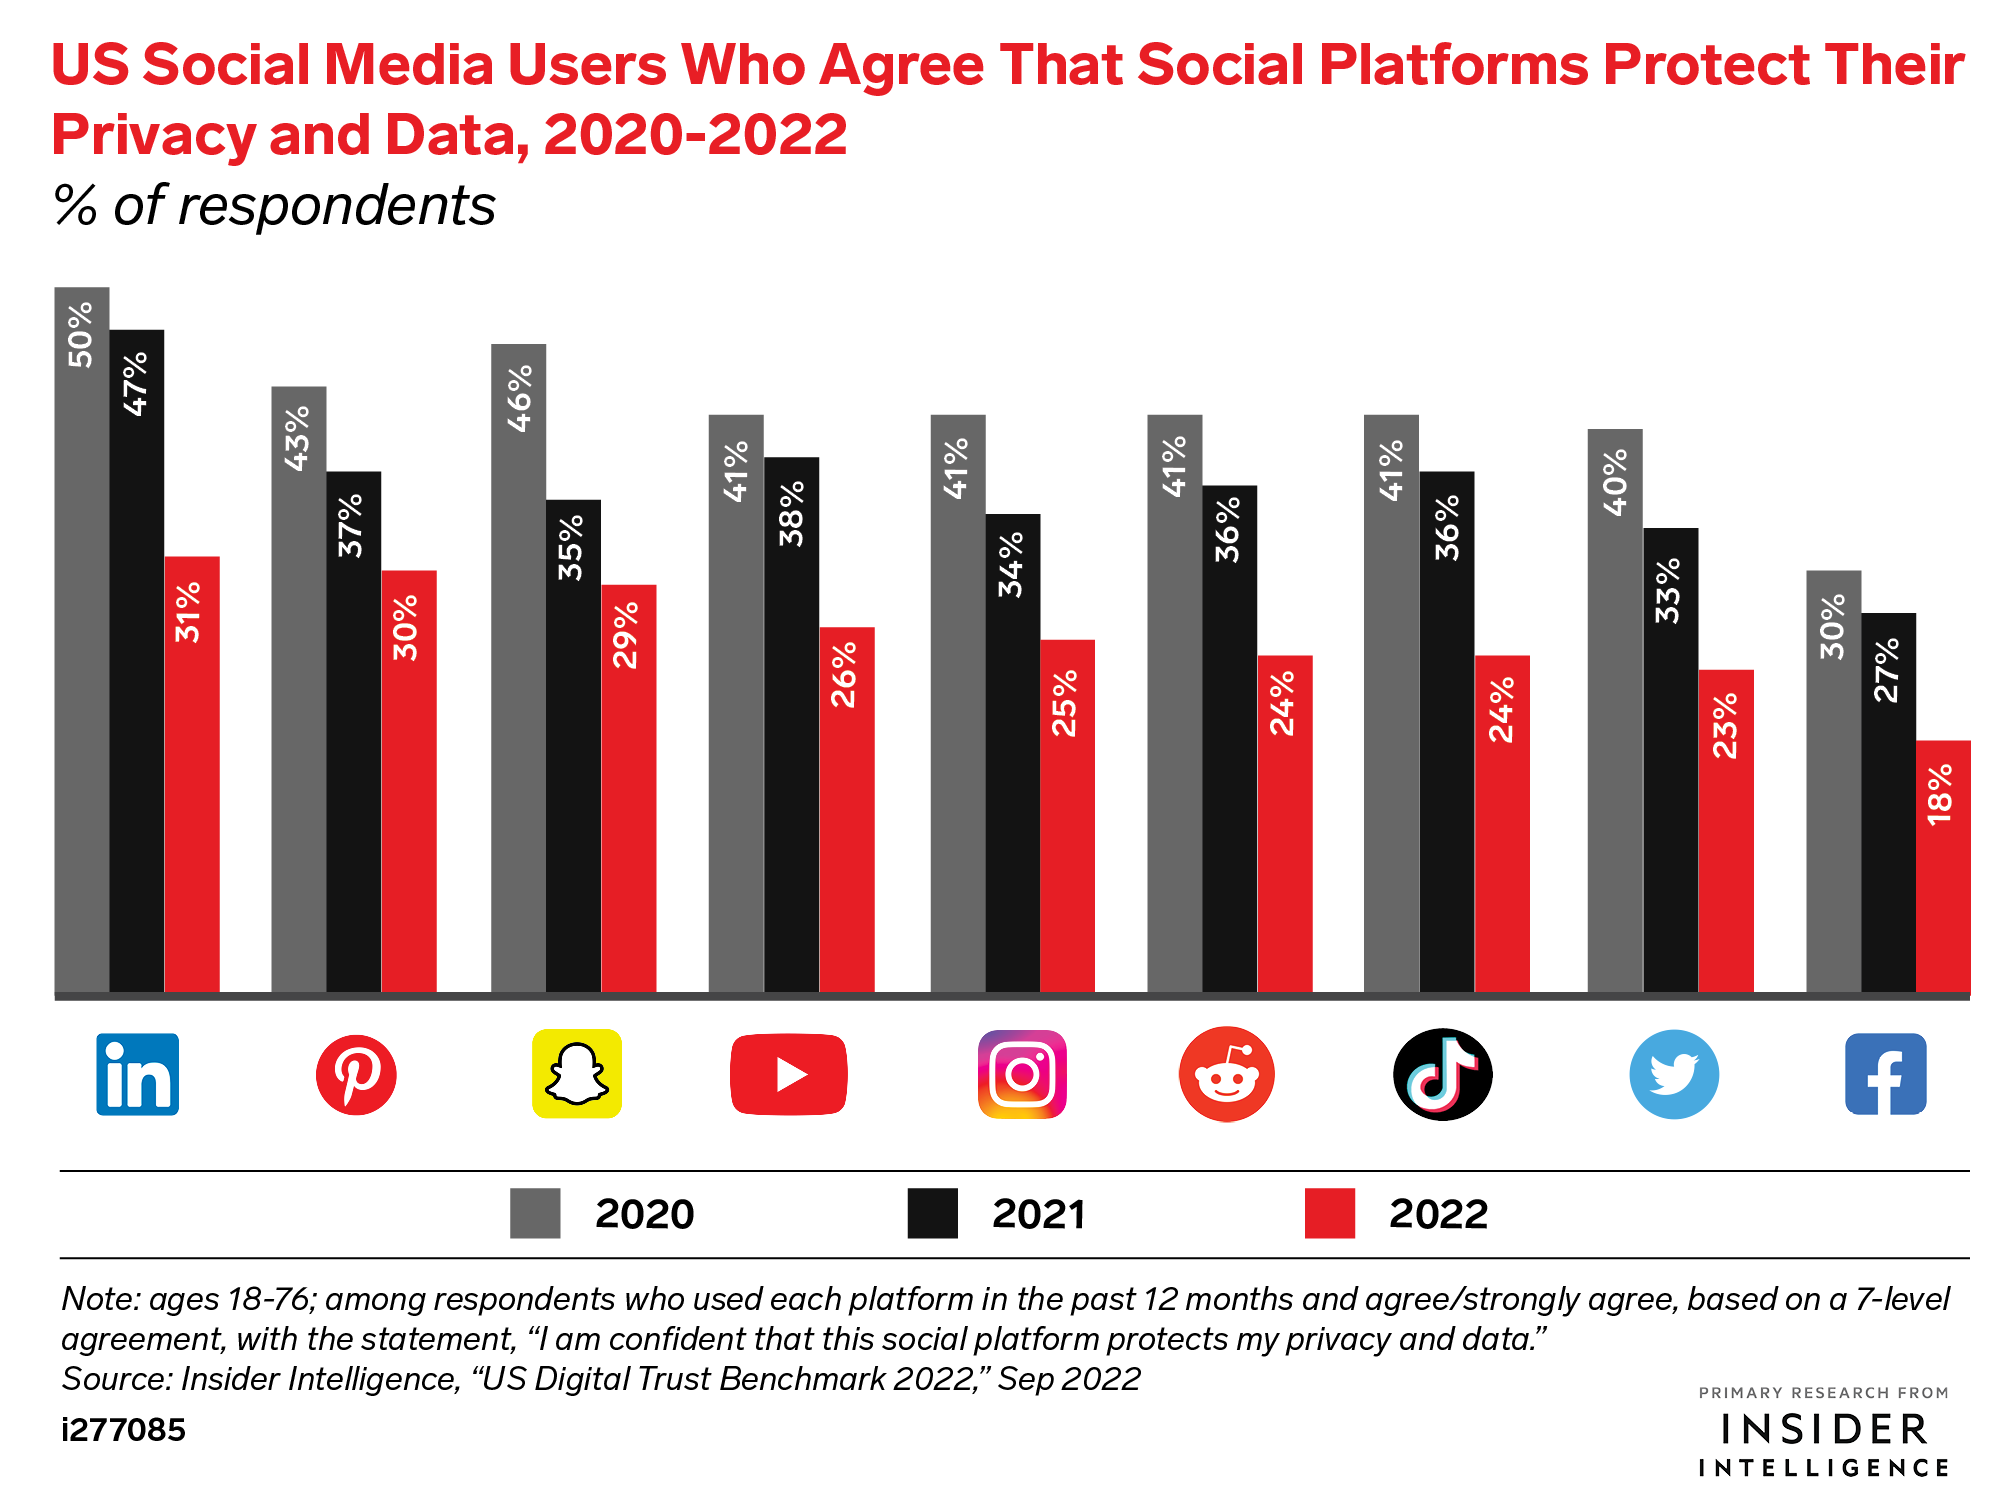 US Social Media Users Who Agree That Social Platforms Protect Their Privacy and Data, 2020-2022 (% of respondents)